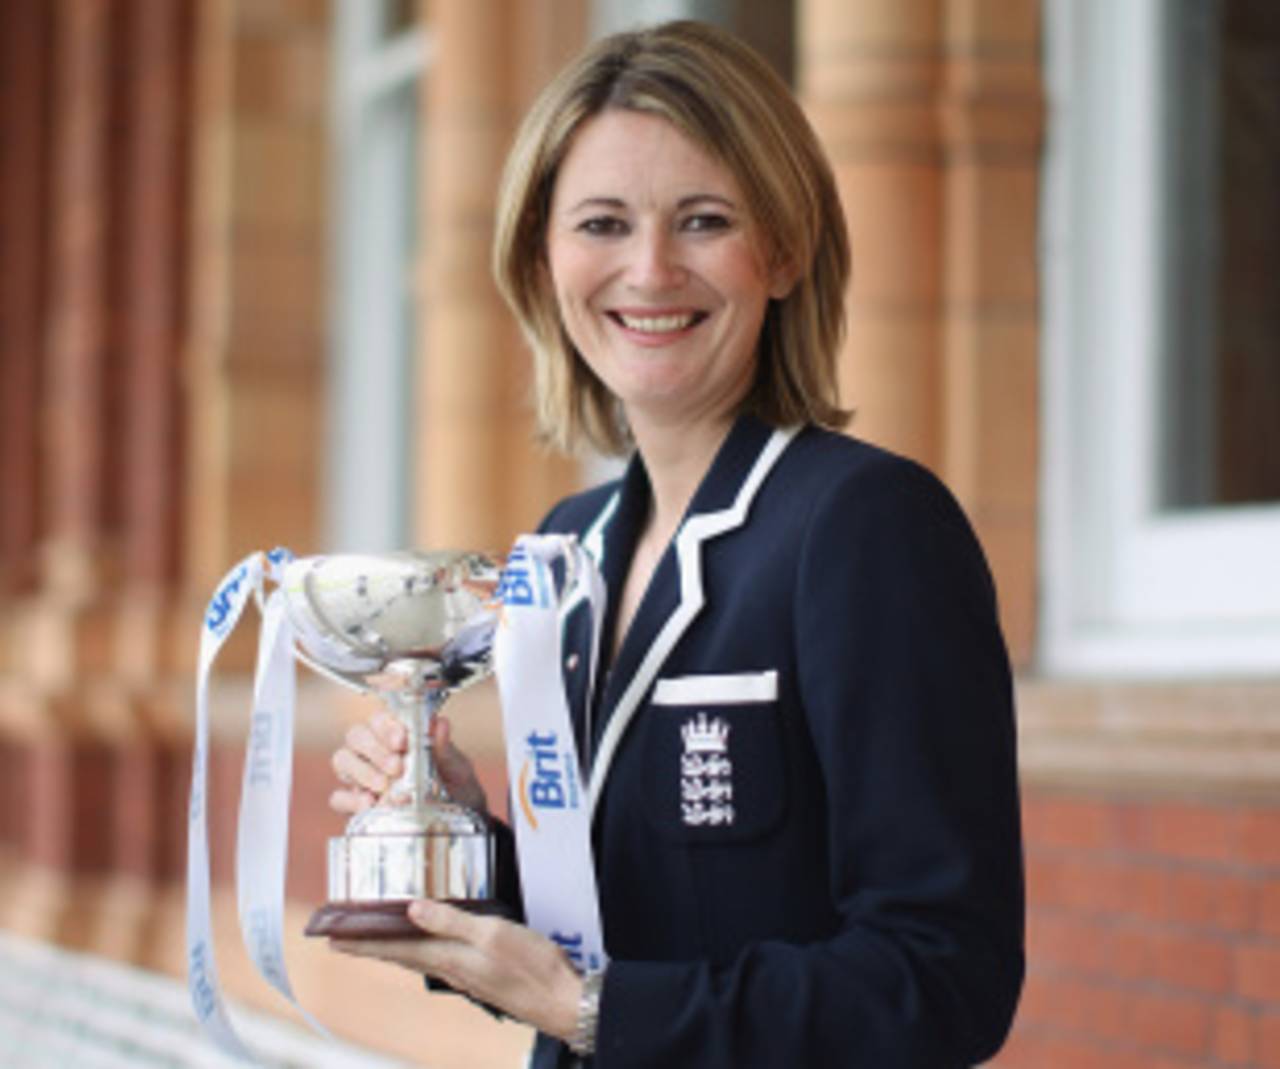 Charlotte Edwards was named the England Women's Player of the Year, Lord's, May 14, 2012